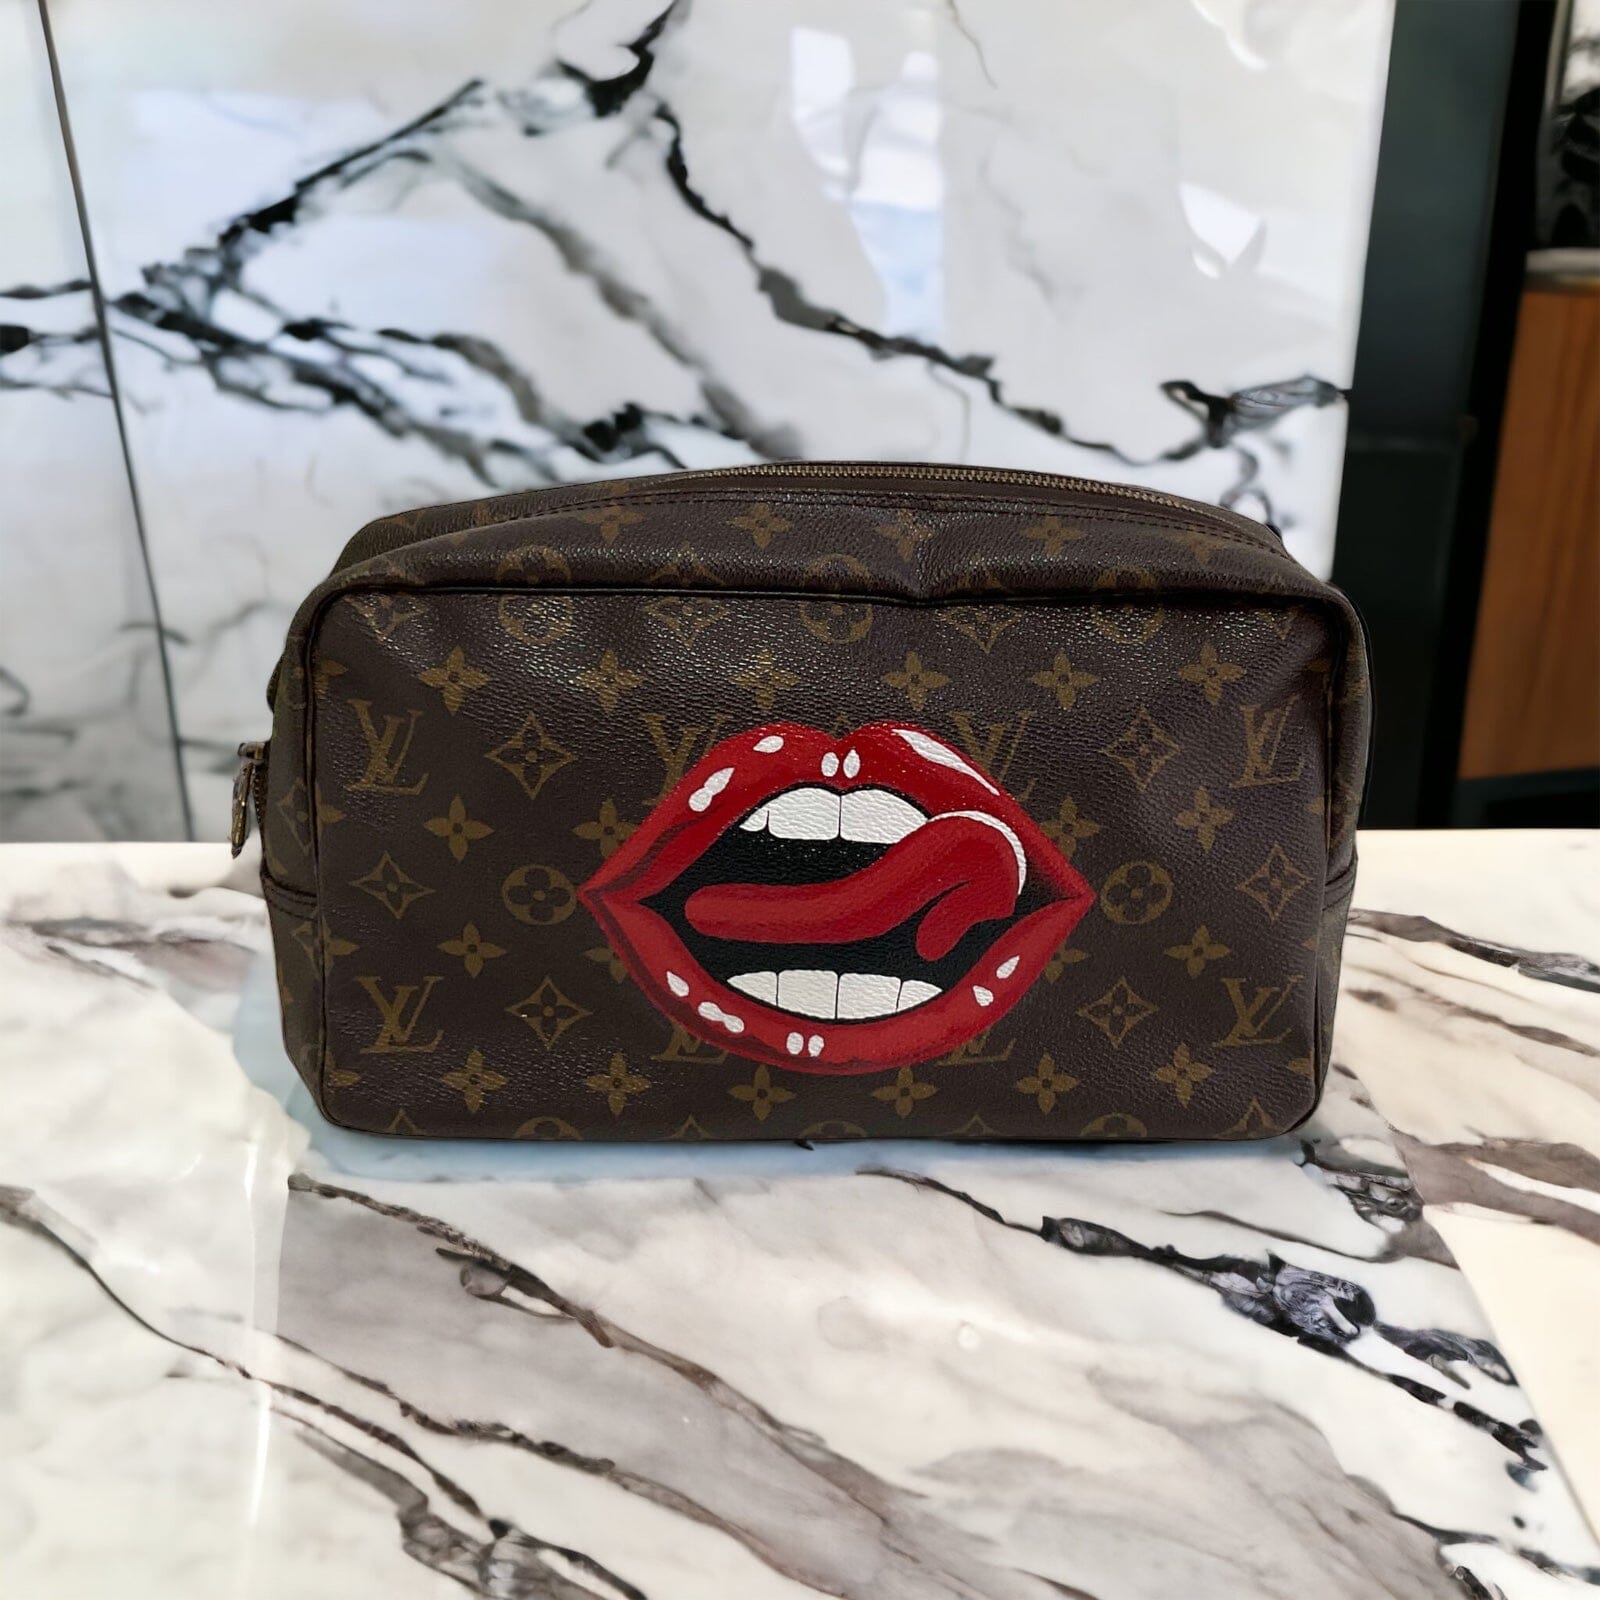 Licking Lips by New Vintage Handbags